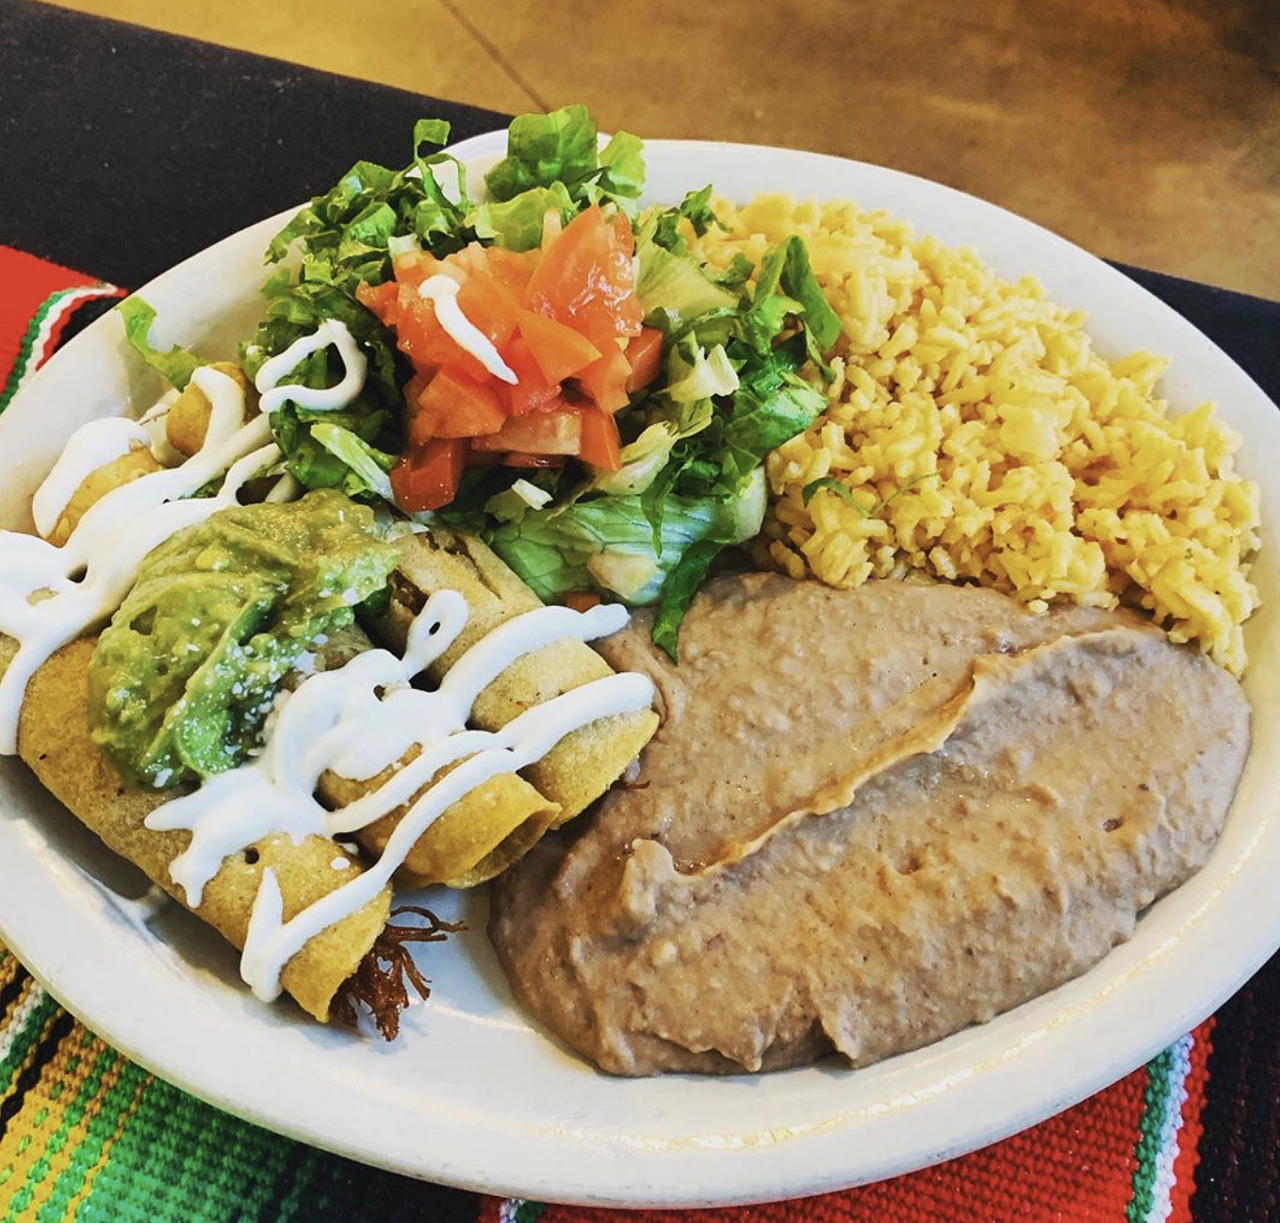 Poblano's on Main
115 S Main Plaza, (210) 357-5609, poblanosonmain.com
Homemade tortillas, savory meats and a cozy atmosphere have all contributed to this Downtown staple’s longevity. If jury duty calls, make a plan to spend your lunch hour here. 
Photo via Instagram /  poblanosmain